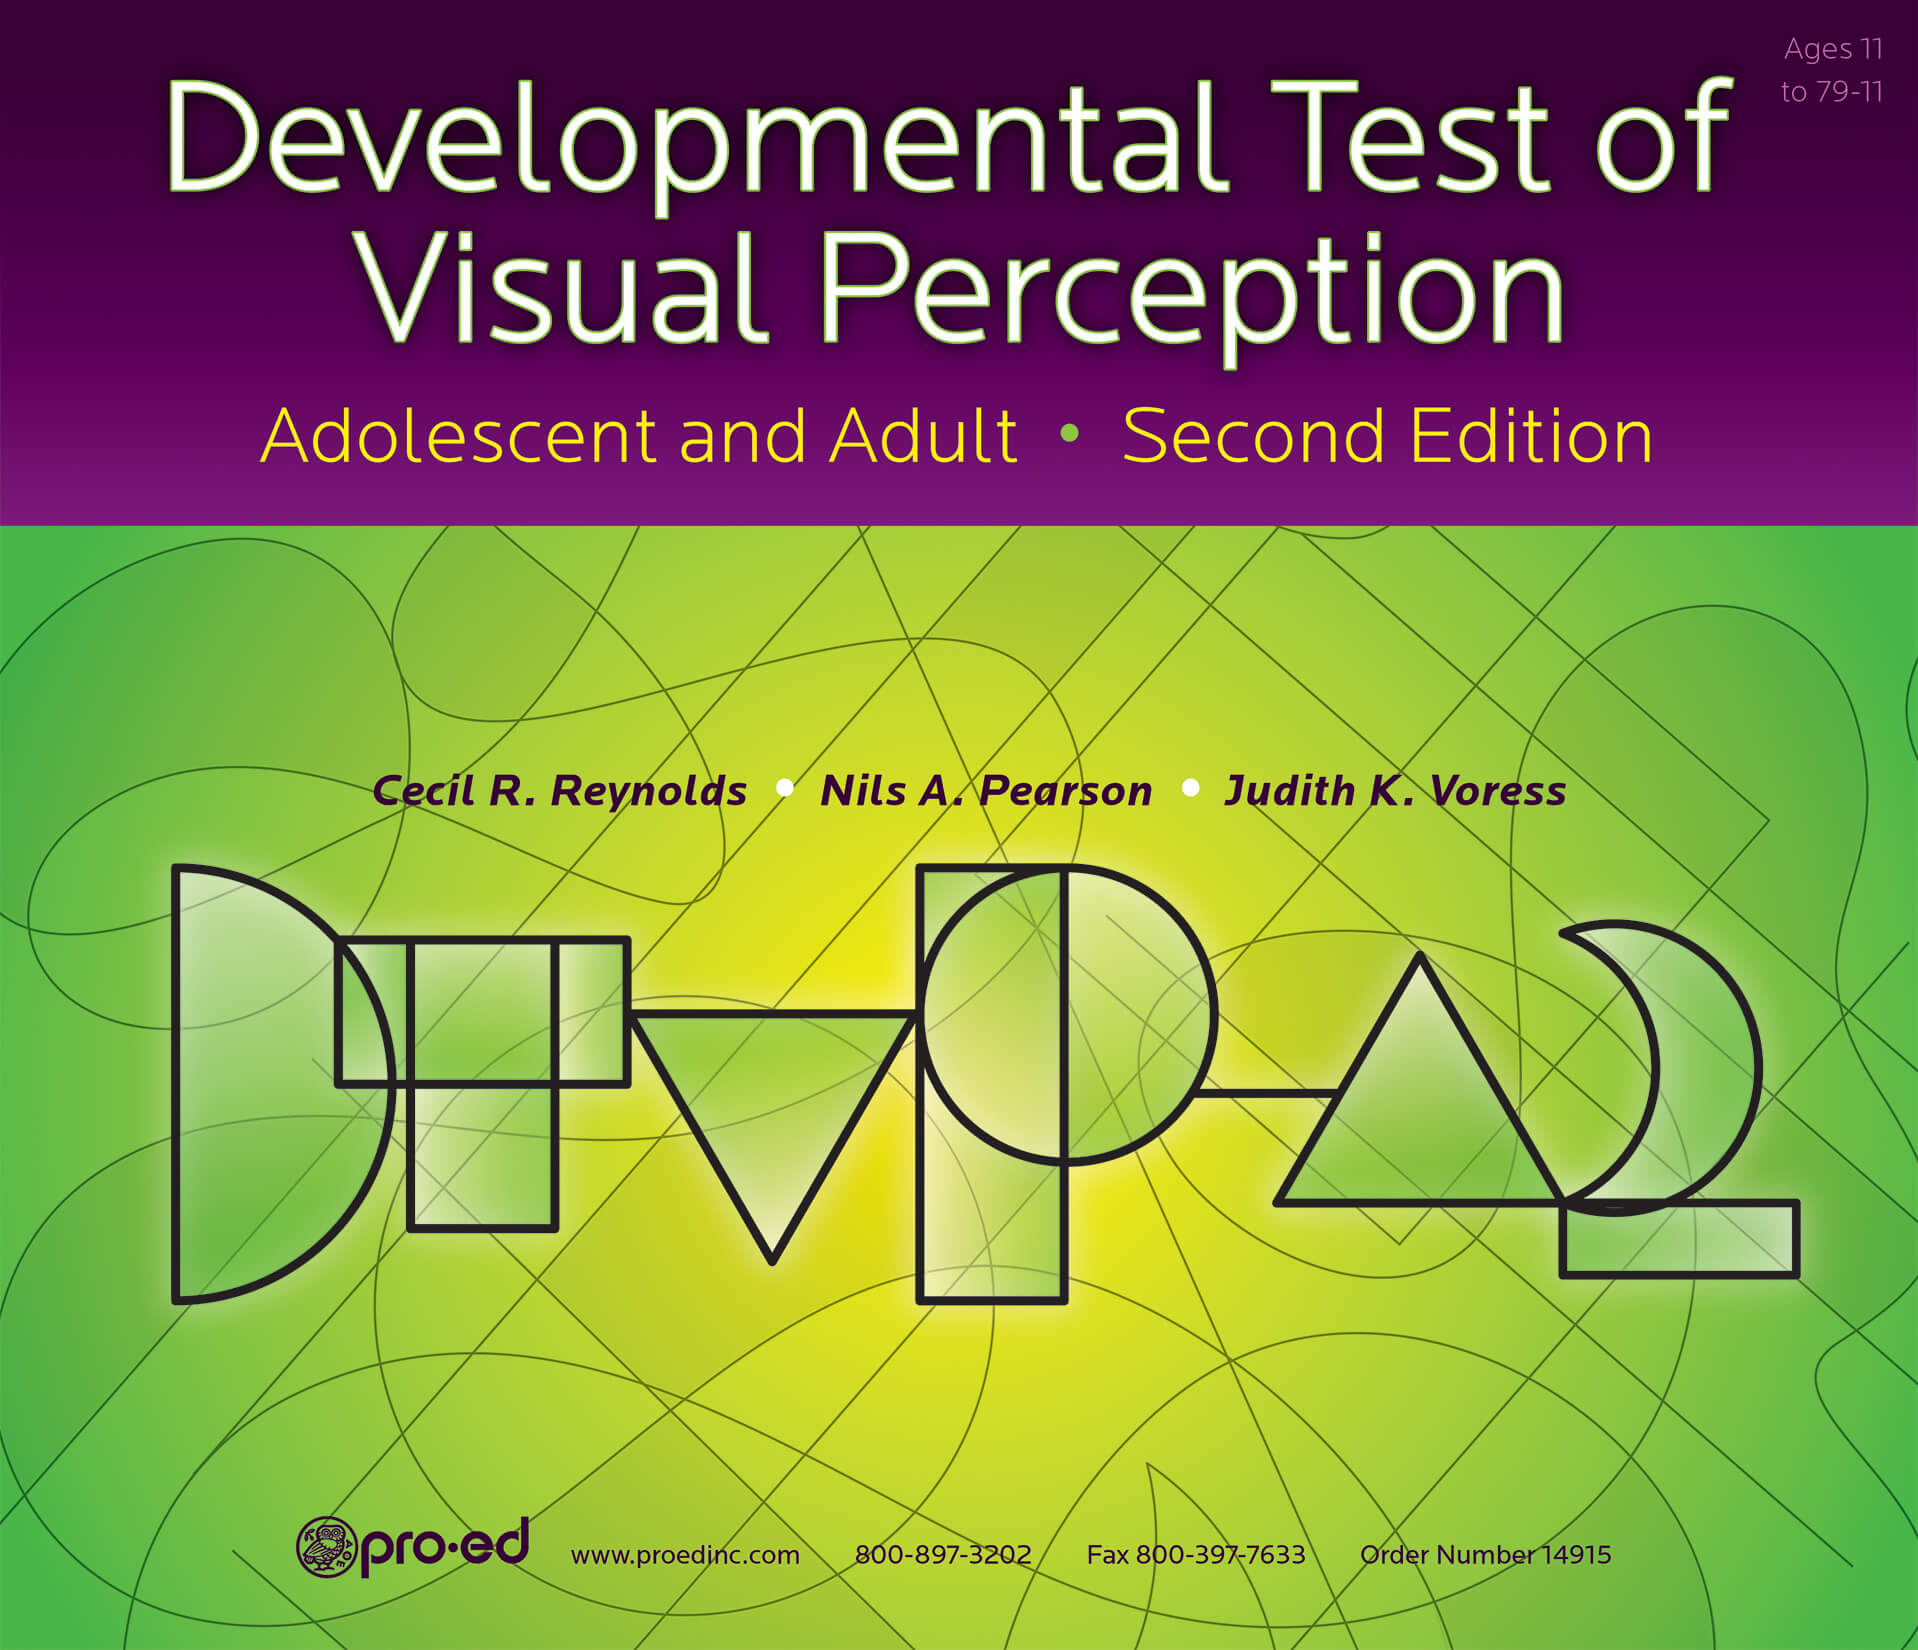 DTVP-A:2 Developmental Test of Visual Perception–Adolescent and Adult 2nd Ed Kit - 